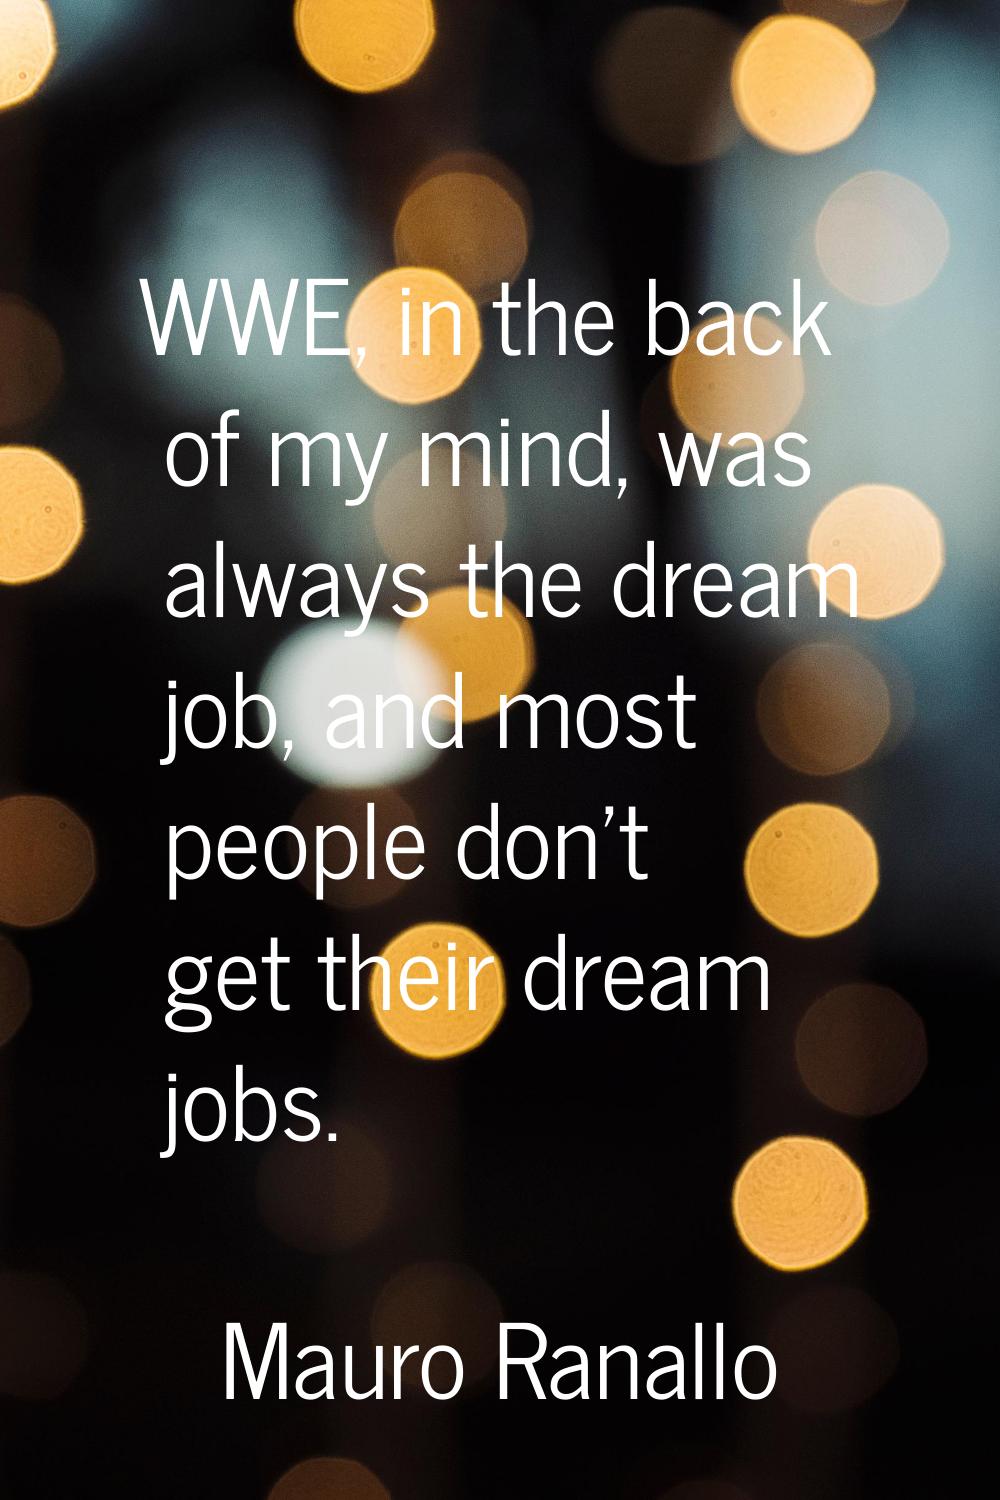 WWE, in the back of my mind, was always the dream job, and most people don't get their dream jobs.